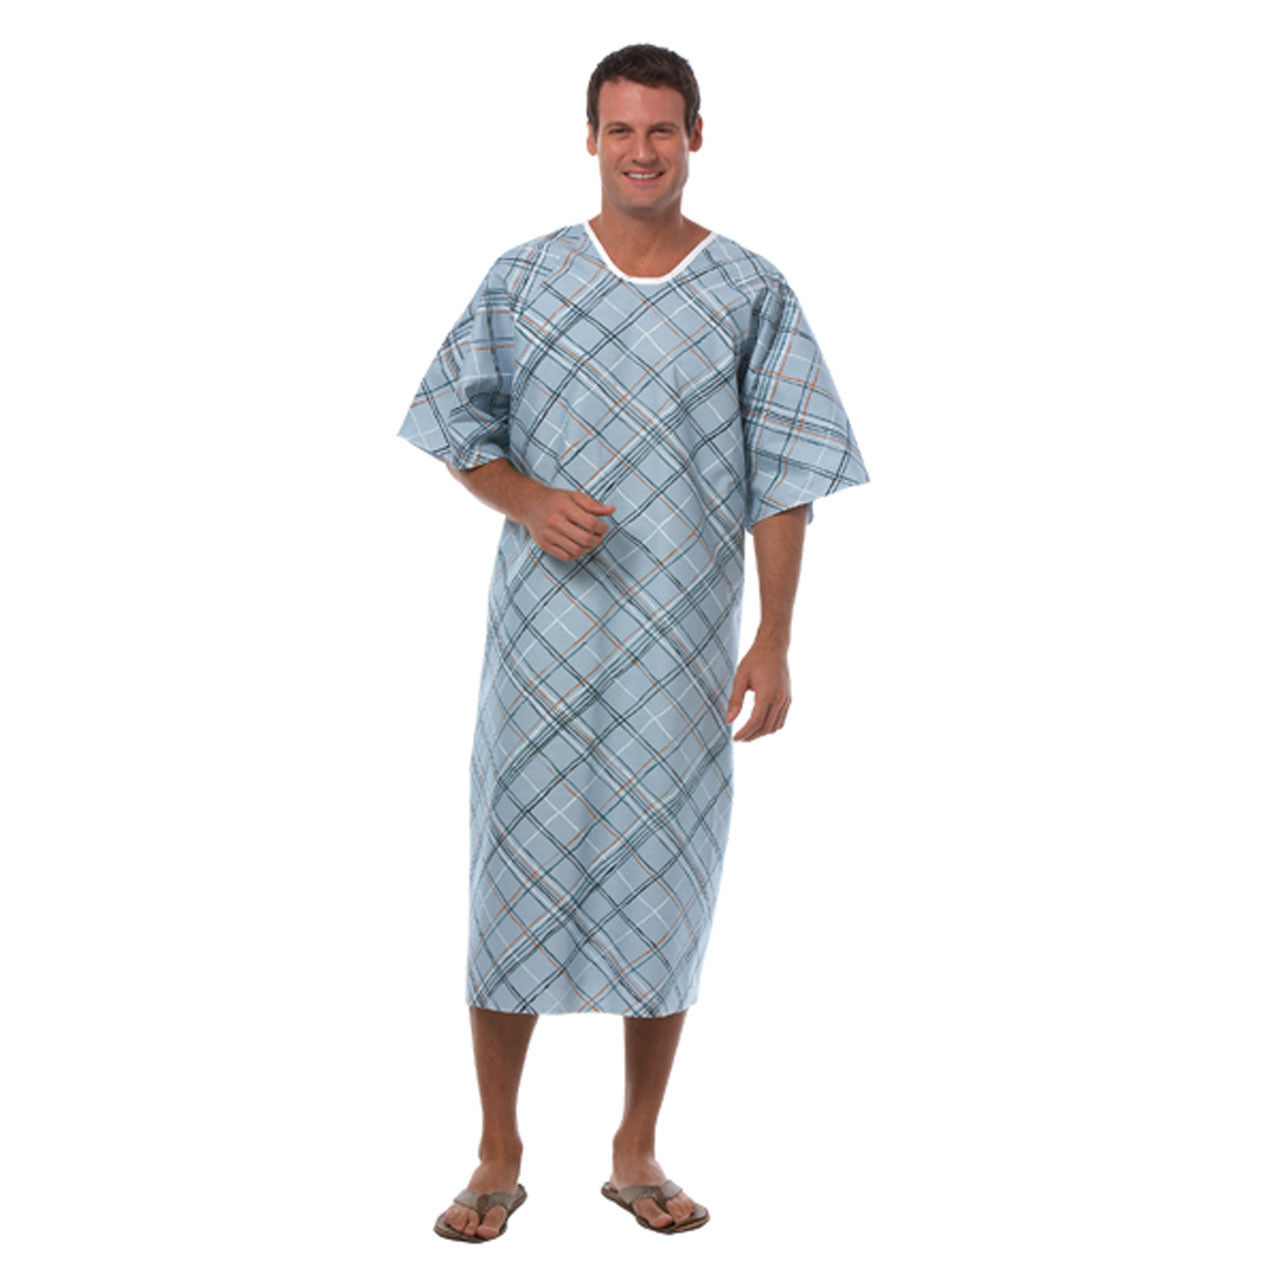 What is the insleeve measurement of the hospital gown?